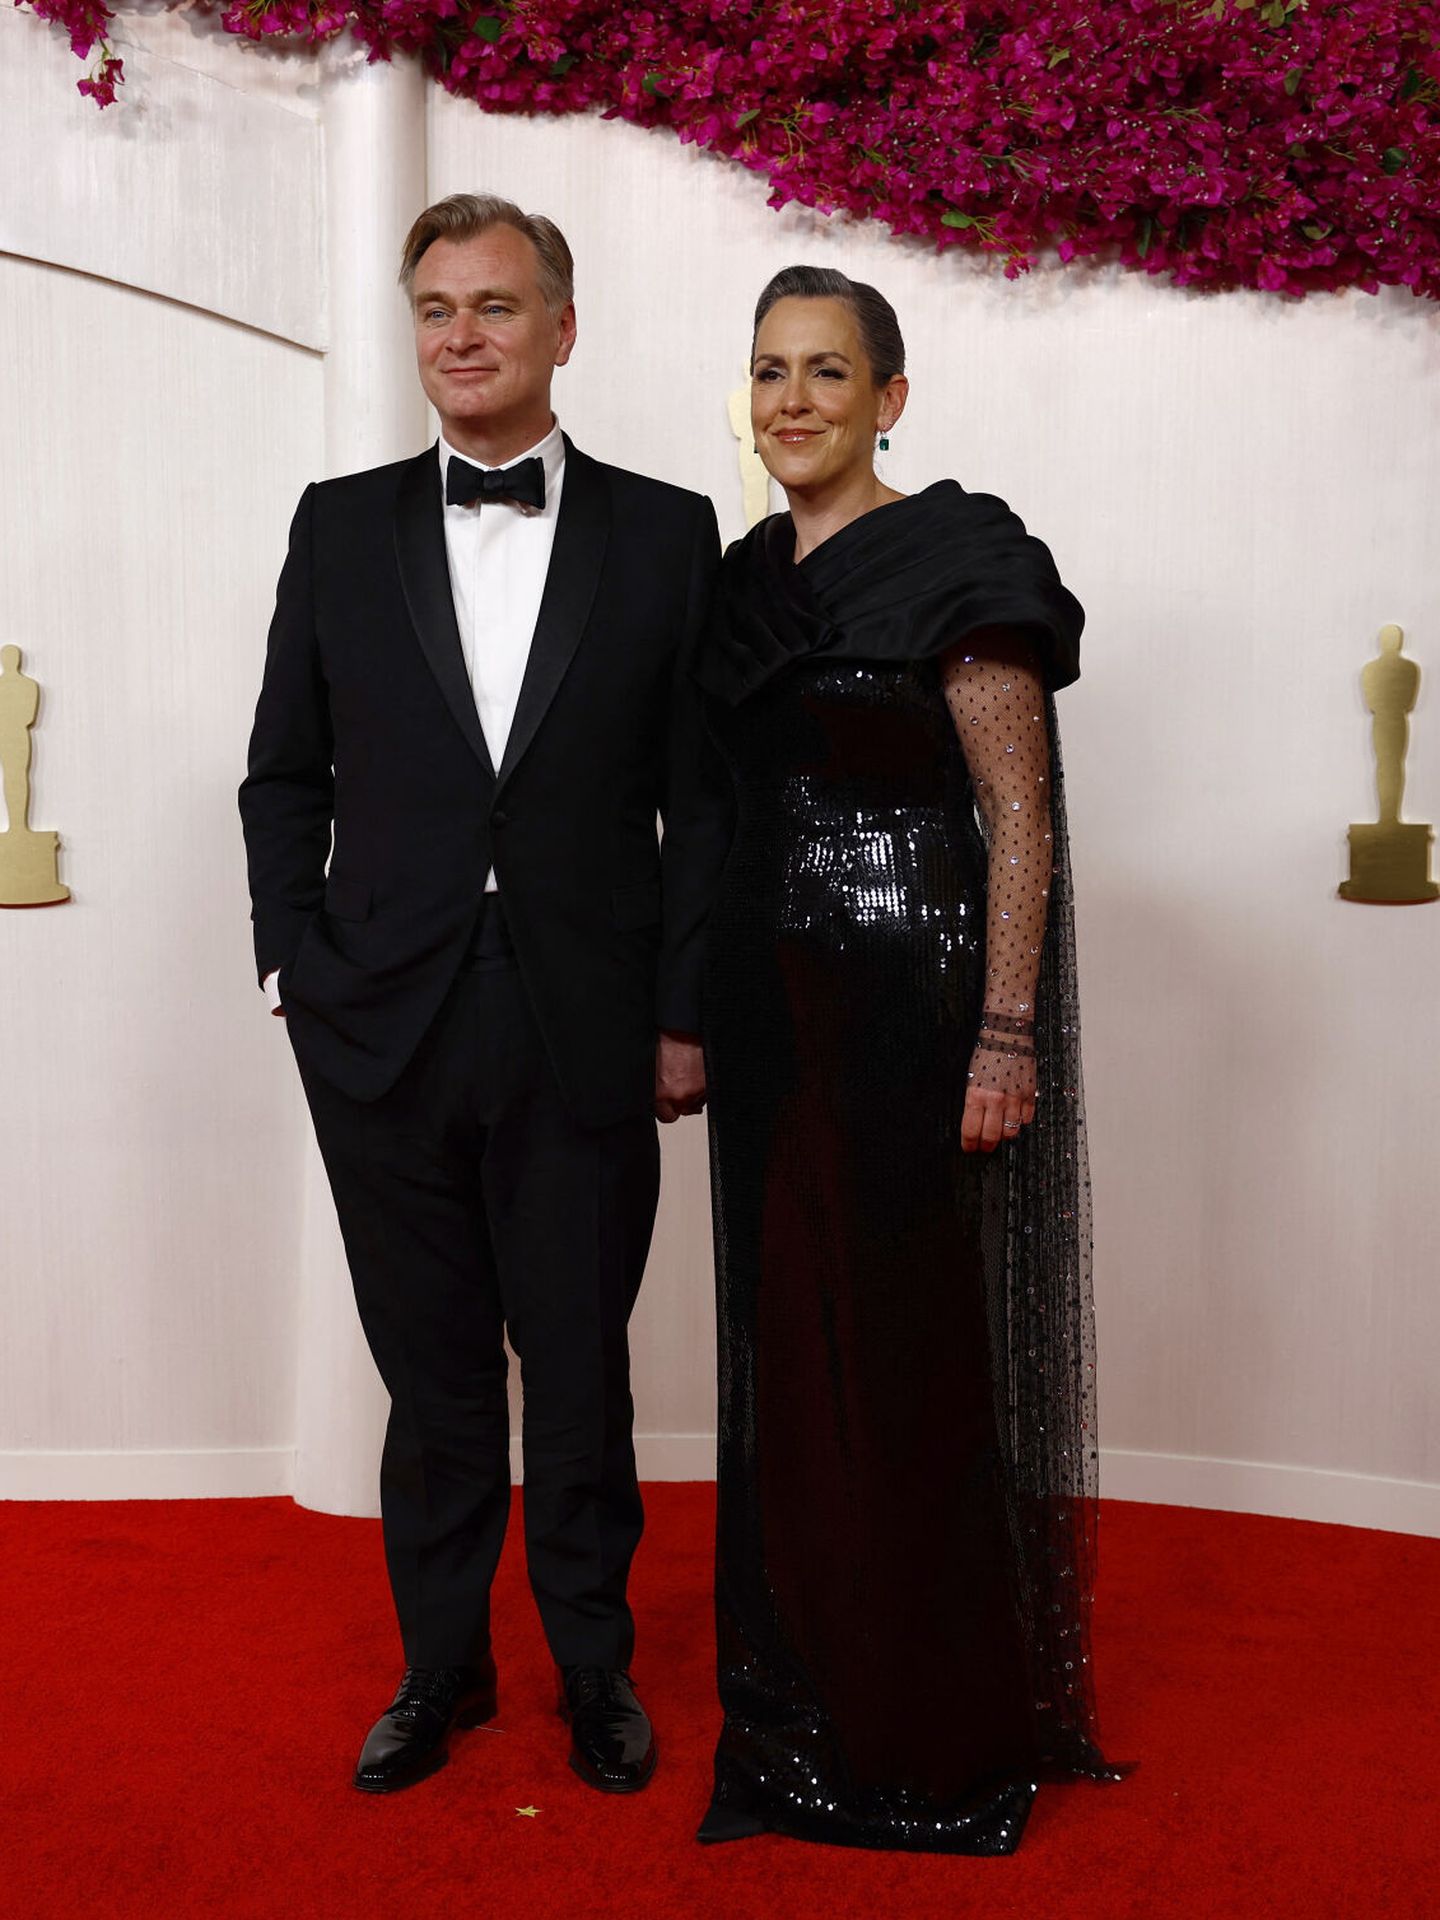 Christopher Nolan and Emma Thomas pose on the red carpet during the Oscars arrivals at the 96th Academy Awards in Hollywood, Los Angeles, California, U.S., March 10, 2024. REUTERS Sarah Meyssonnier